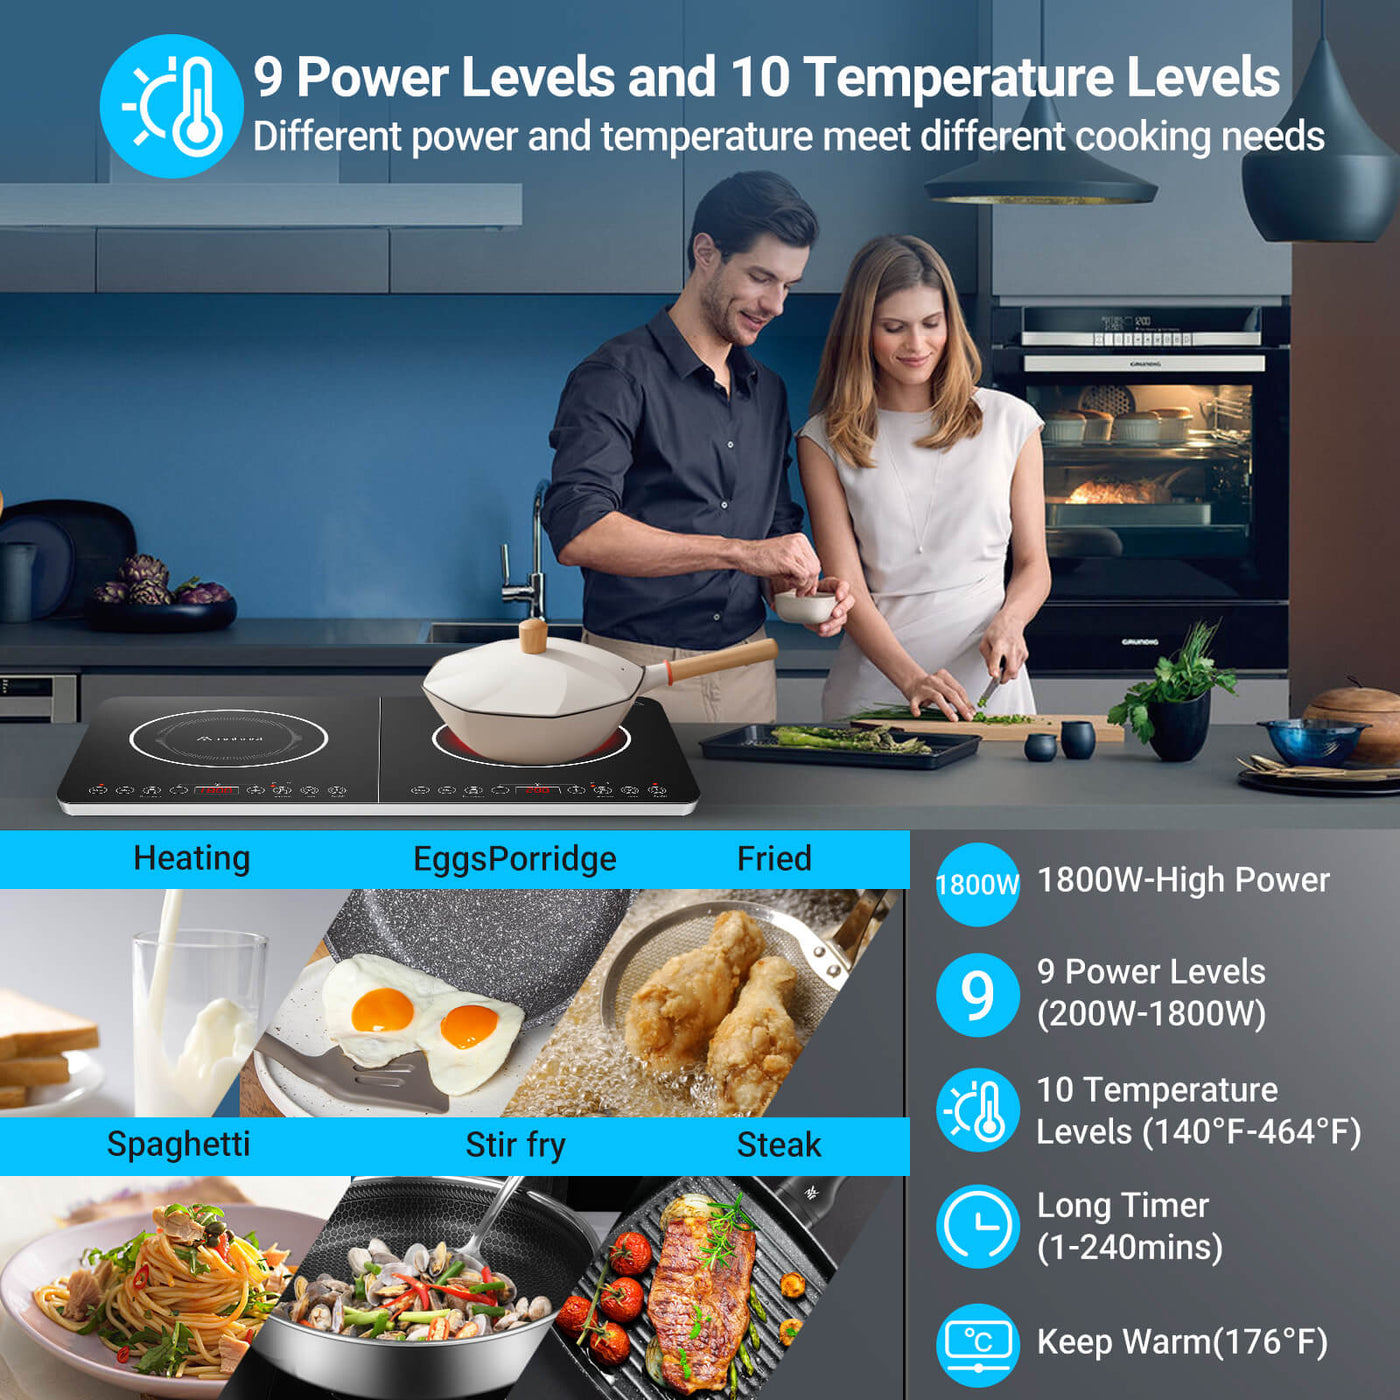 different power and temperature meet different cooking needs